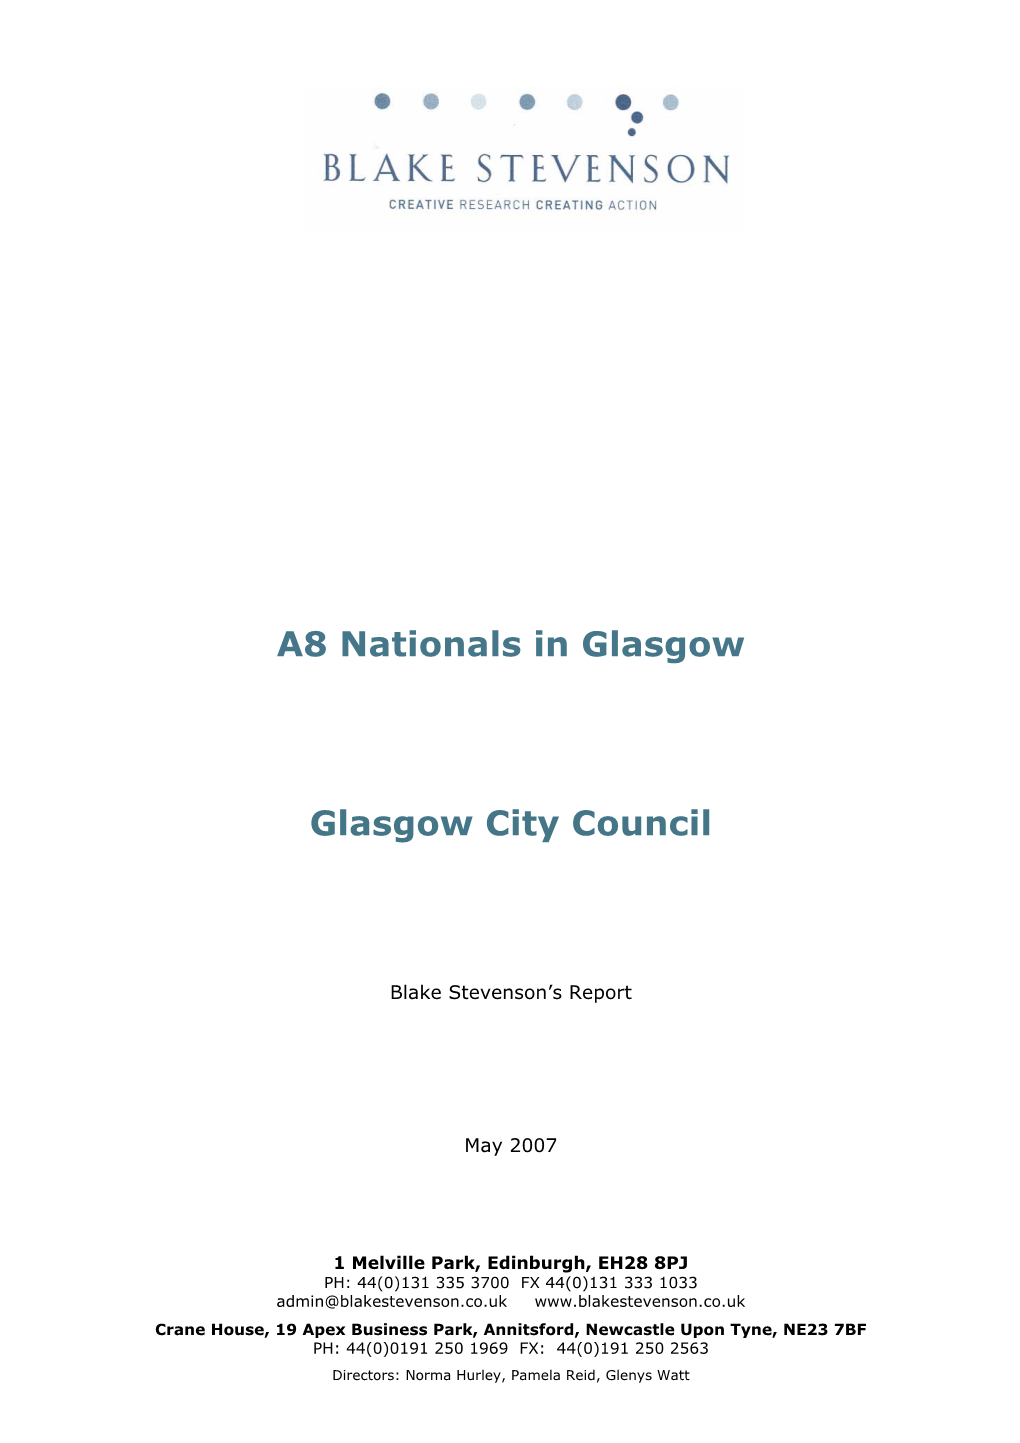 Size and Profile of the A8 Population in Glasgow